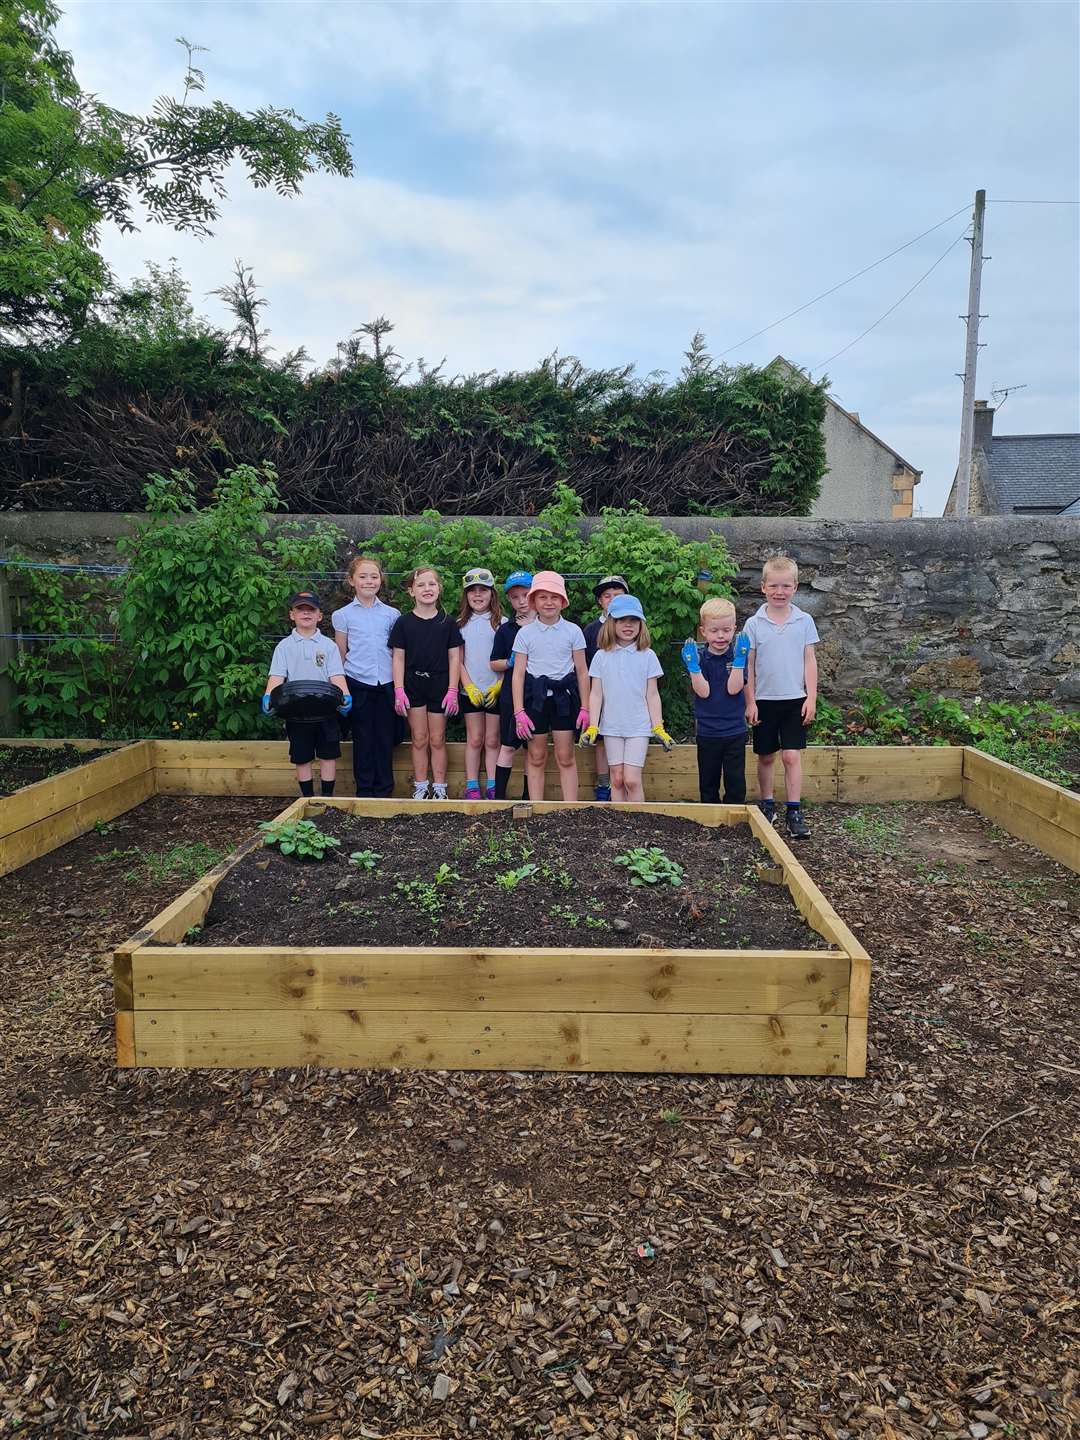 Children at Keith Primary School are pleased with their new garden space.